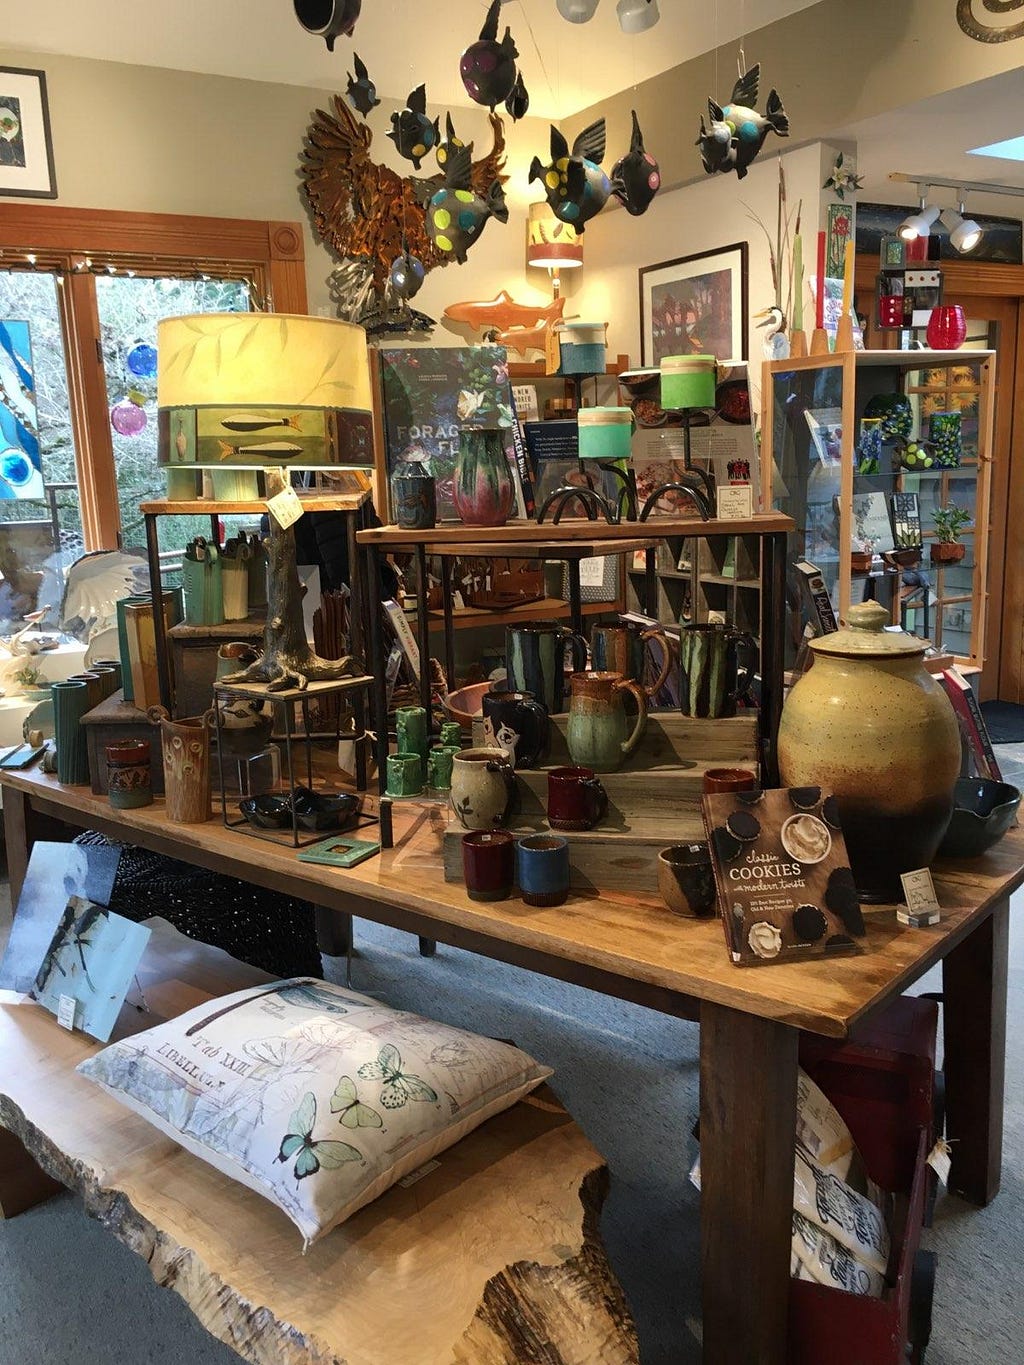 A variety of handcrafted items are on display at the Chuckanut Gallery.